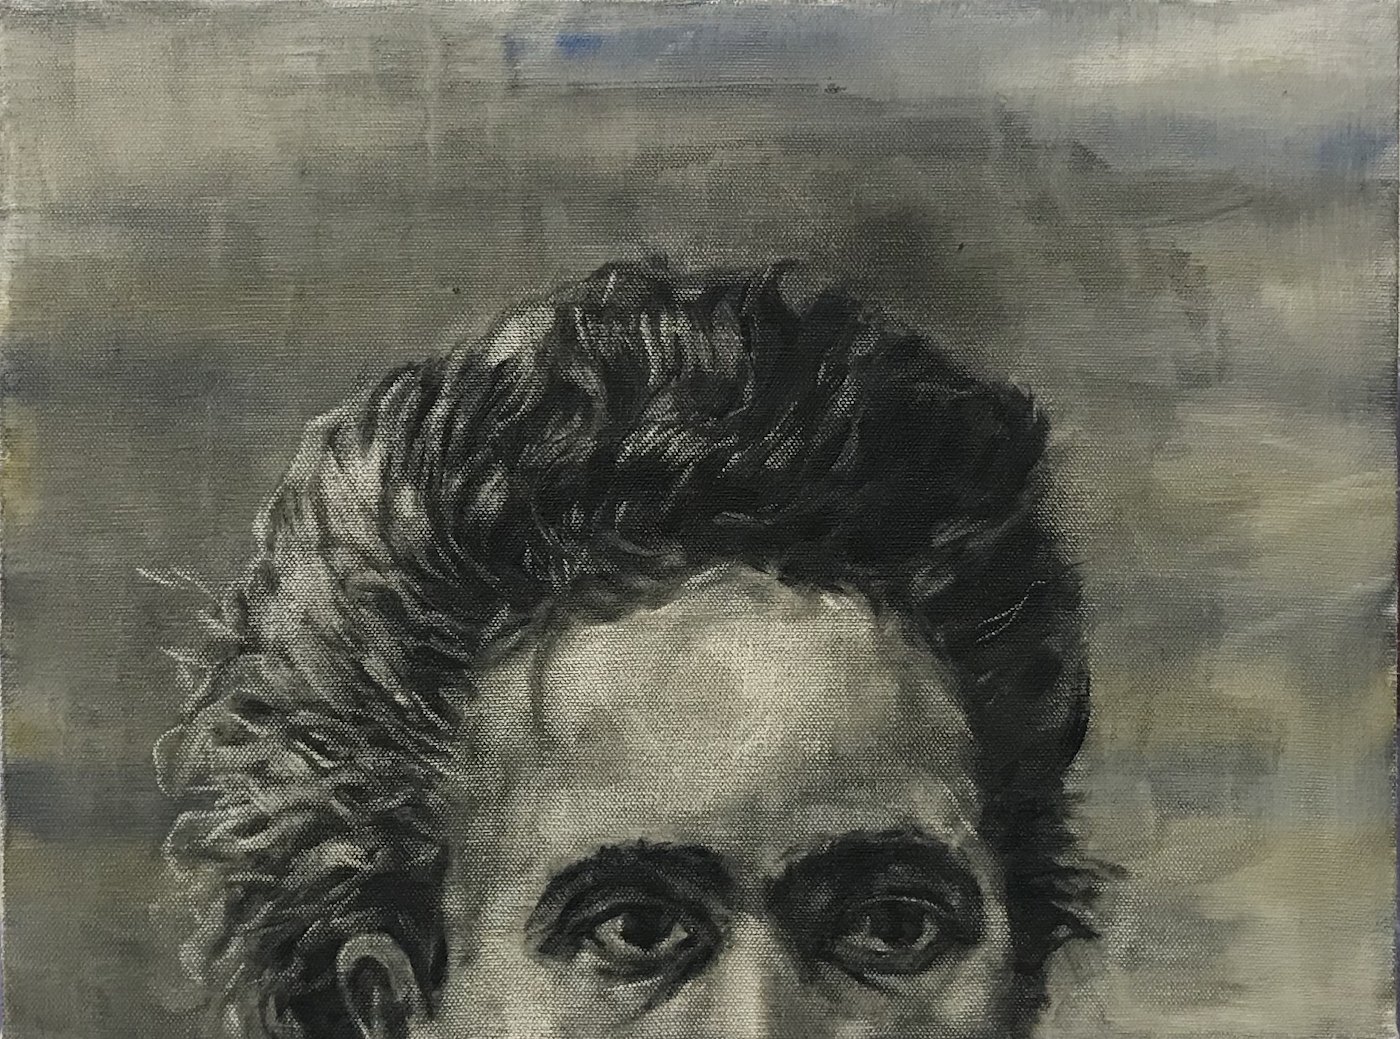   Marie Curie , 2020, Oil on canvas, 12 x 16 inches 